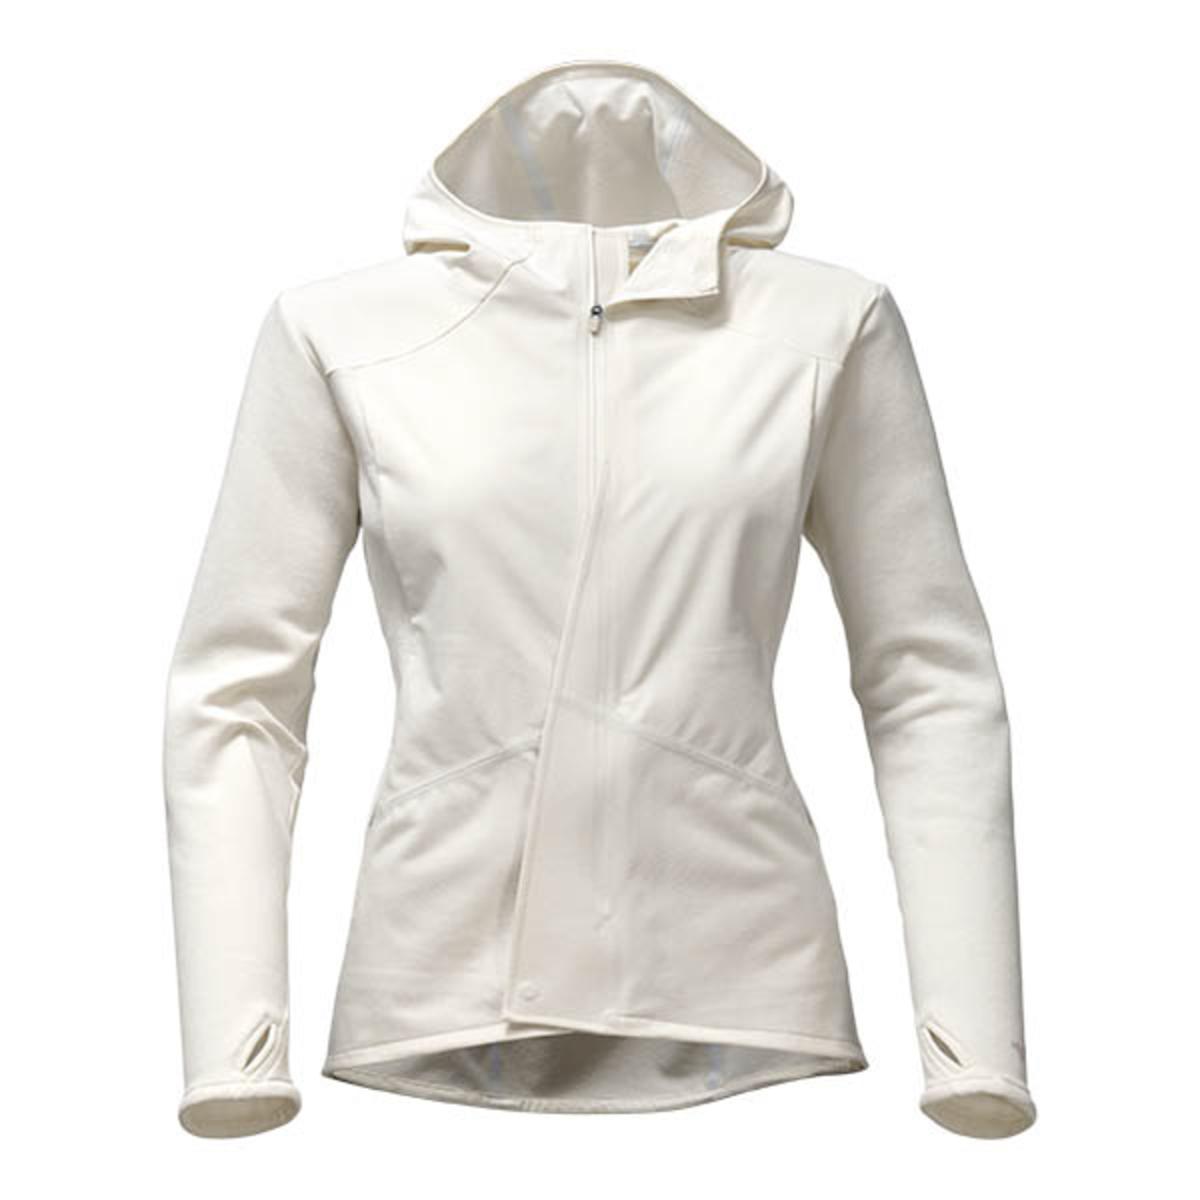 north face motivation thermoball jacket